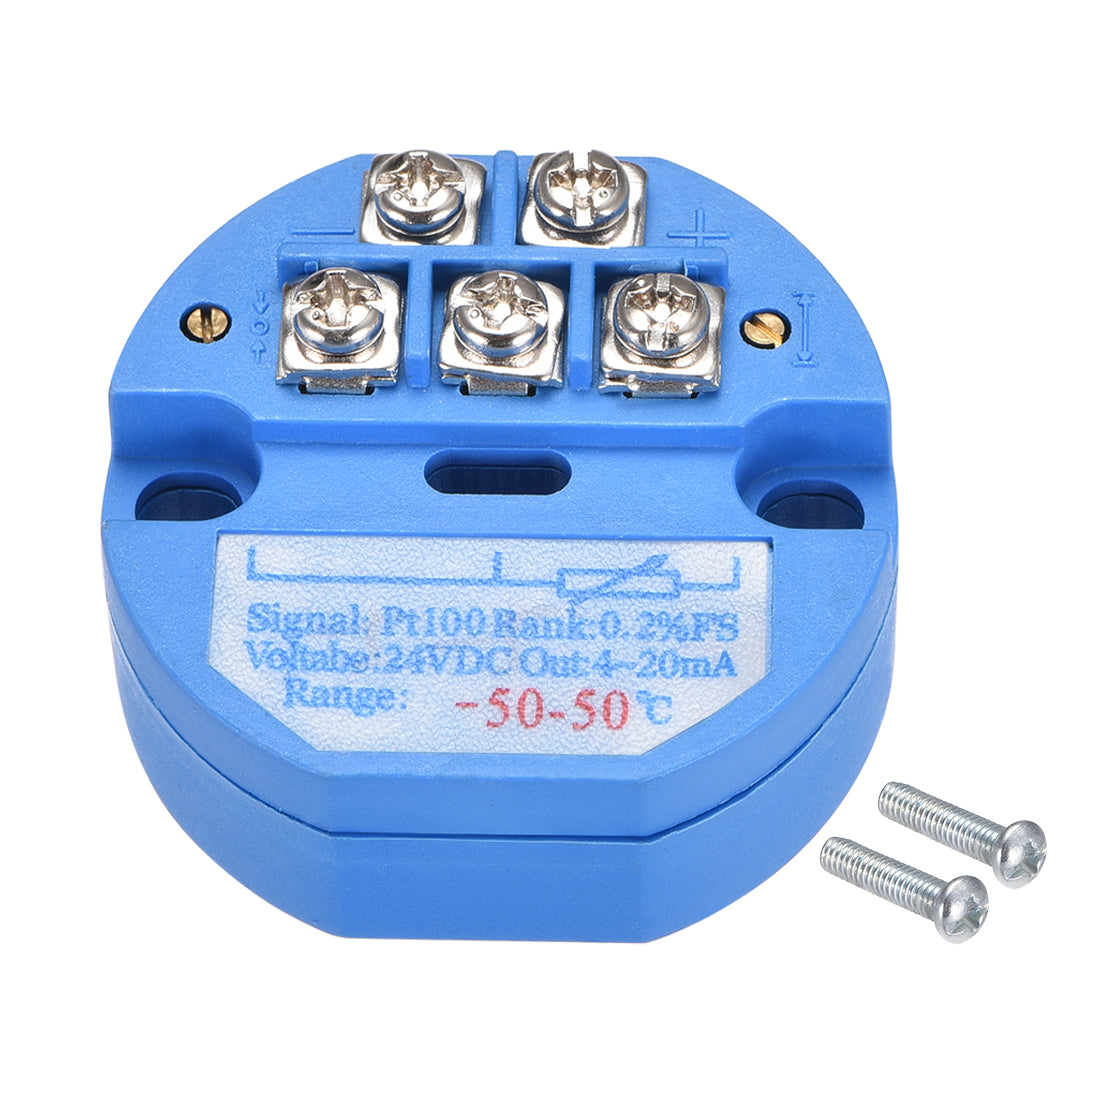 uxcell Uxcell PT100 Temperature Sensor Transmitter 24V DC 4-20mA -50℃ to 50℃